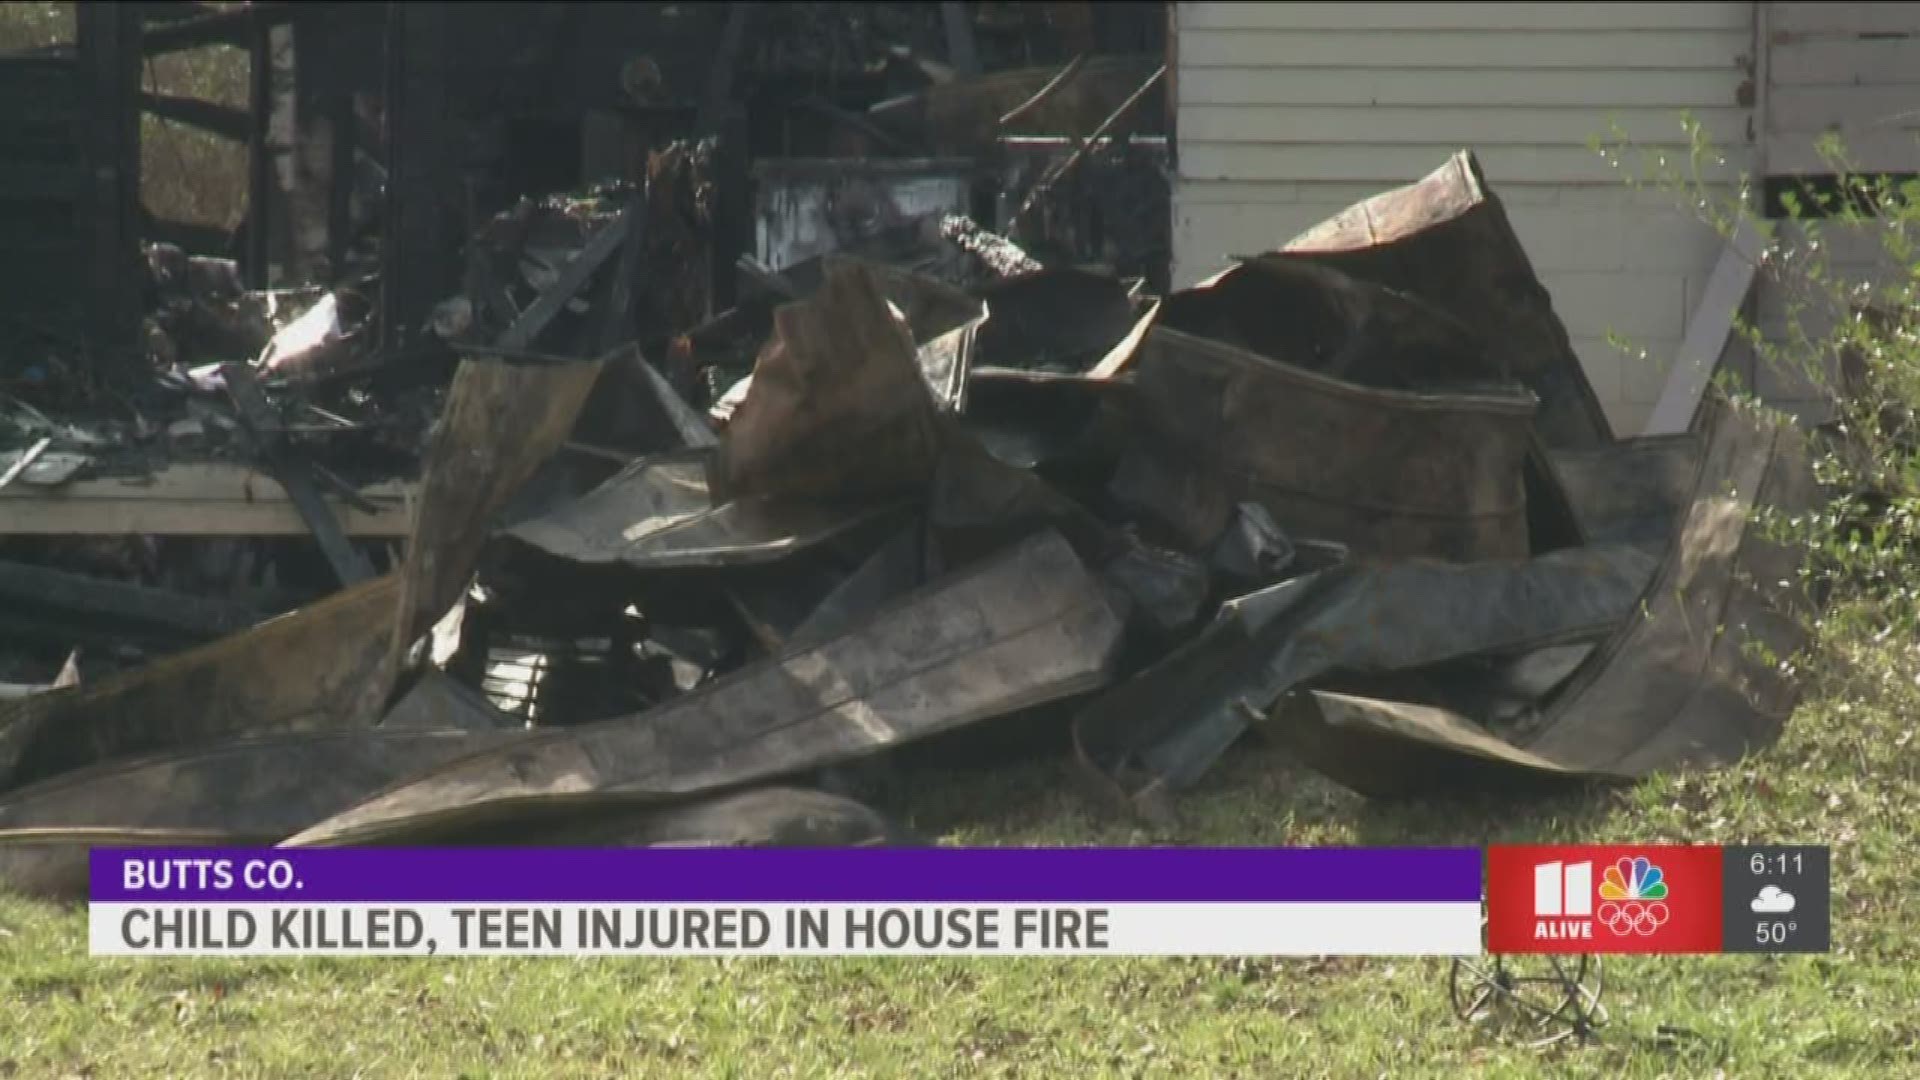 Authorities said a 12-year-old boy was killed and a 16-year-old girl was hurt in a house fire in Butts County early Sunday morning.